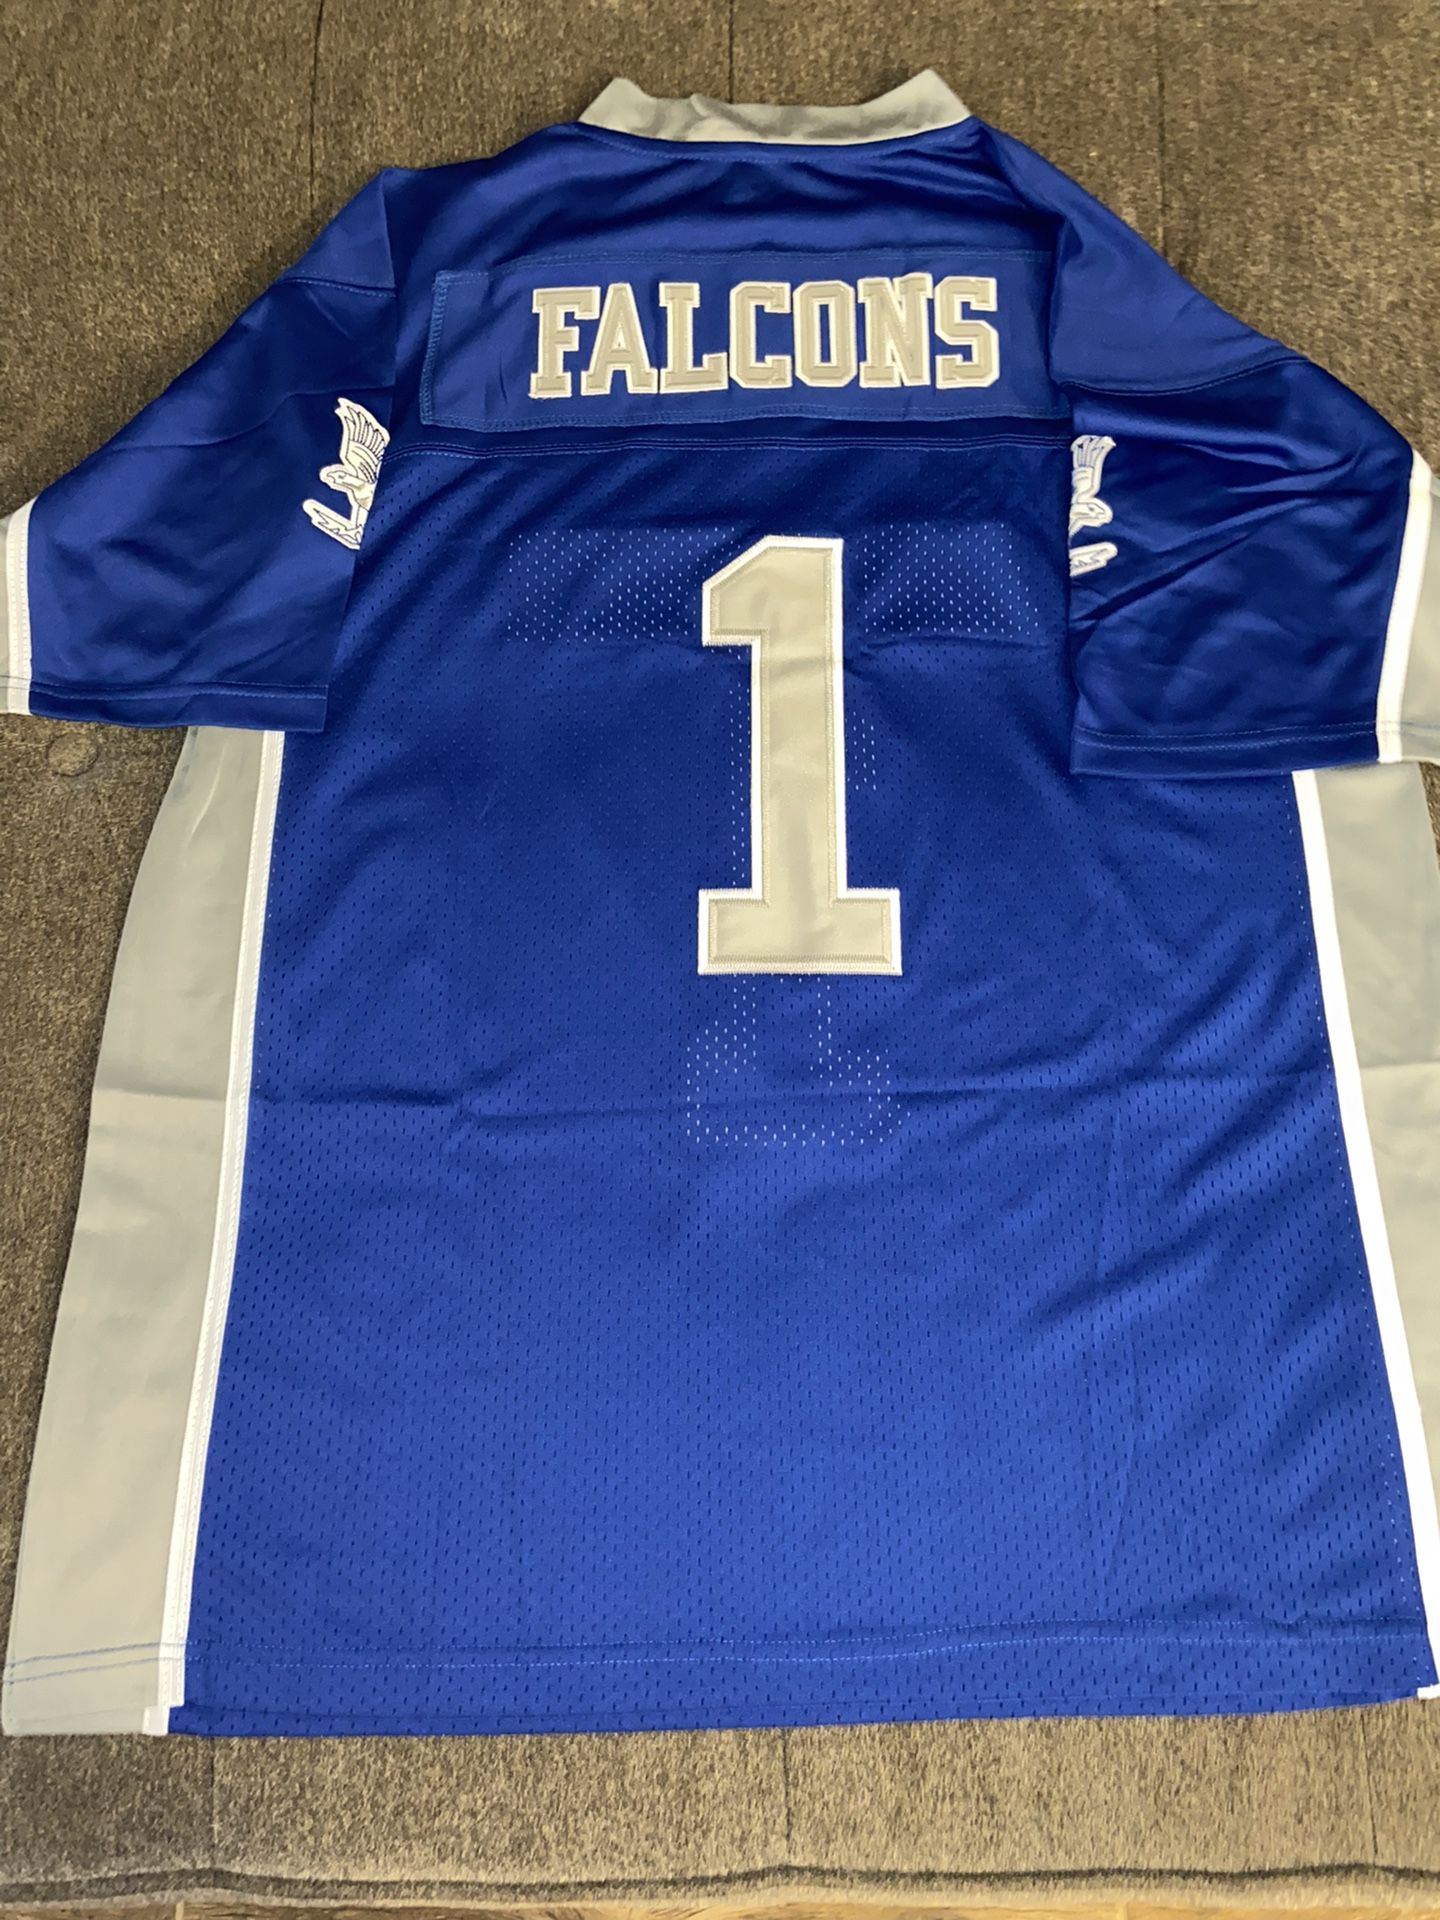 Air Force Falcons Jersey Men’s Large NWT 